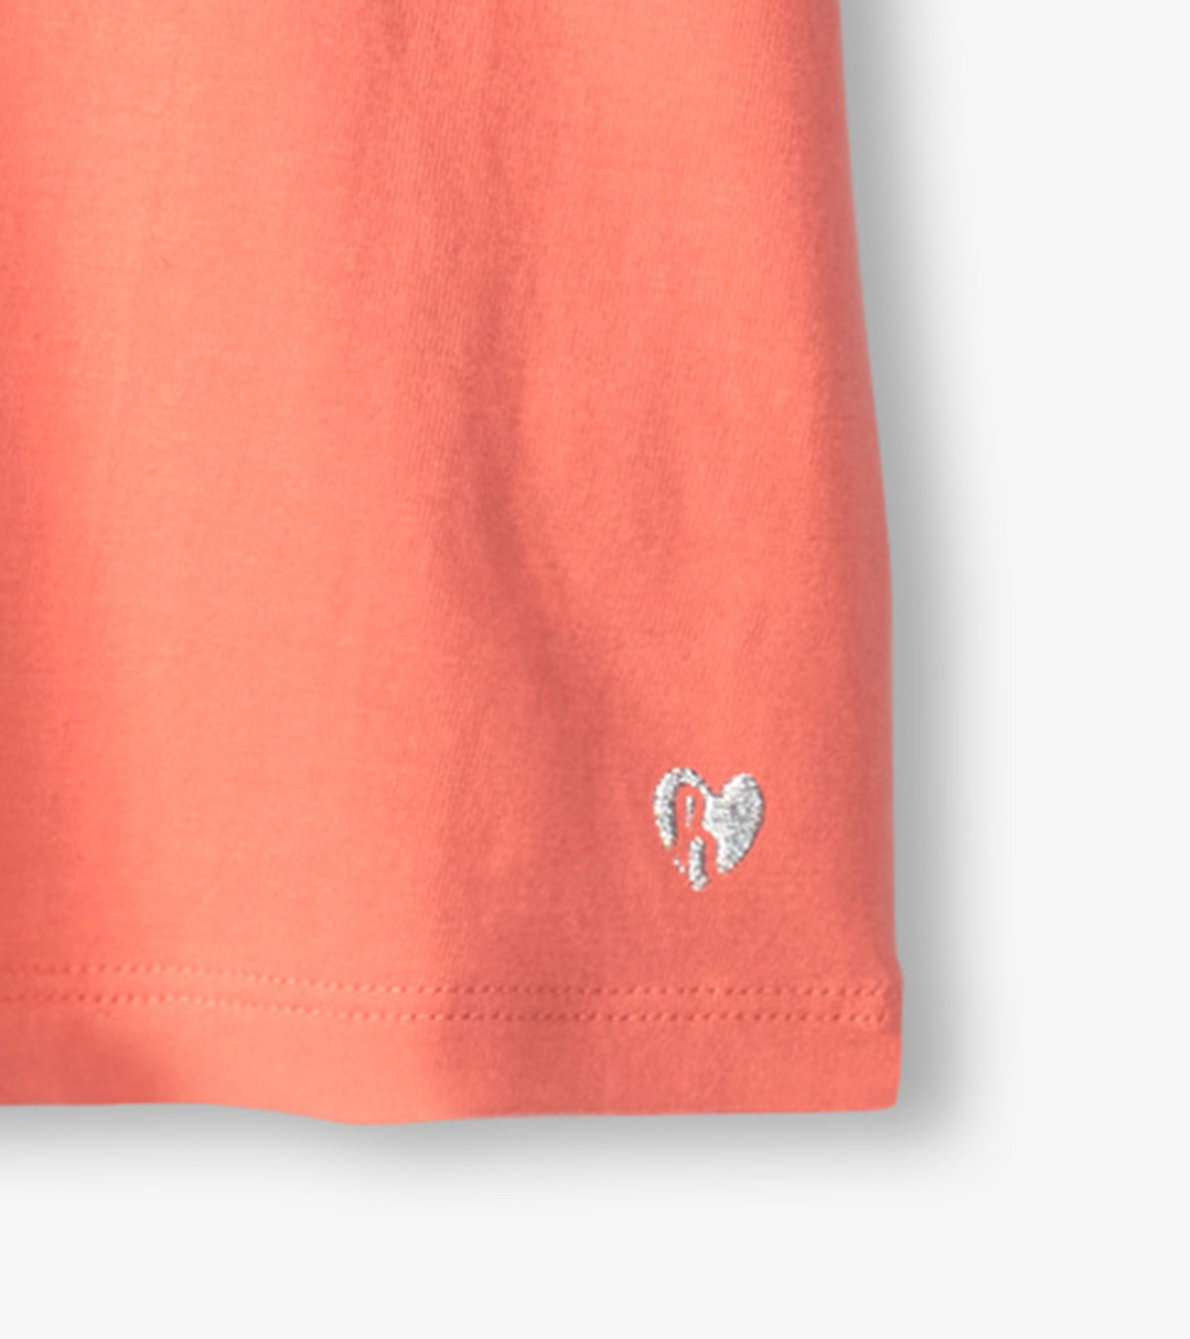 View larger image of Girls Coral Twisted Sleeve Tee